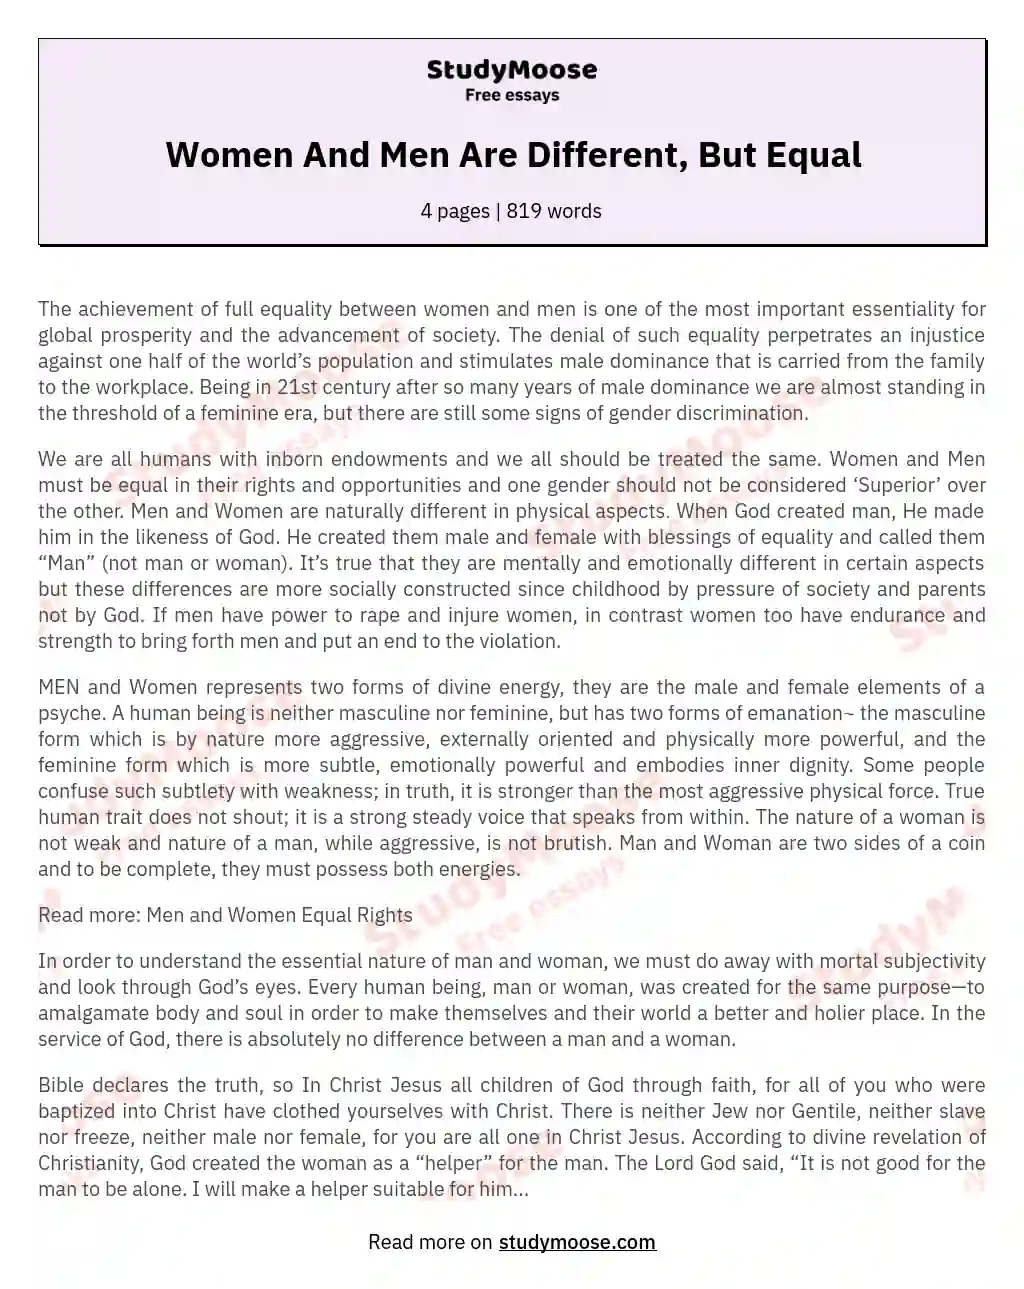 Women And Men Are Different, But Equal essay